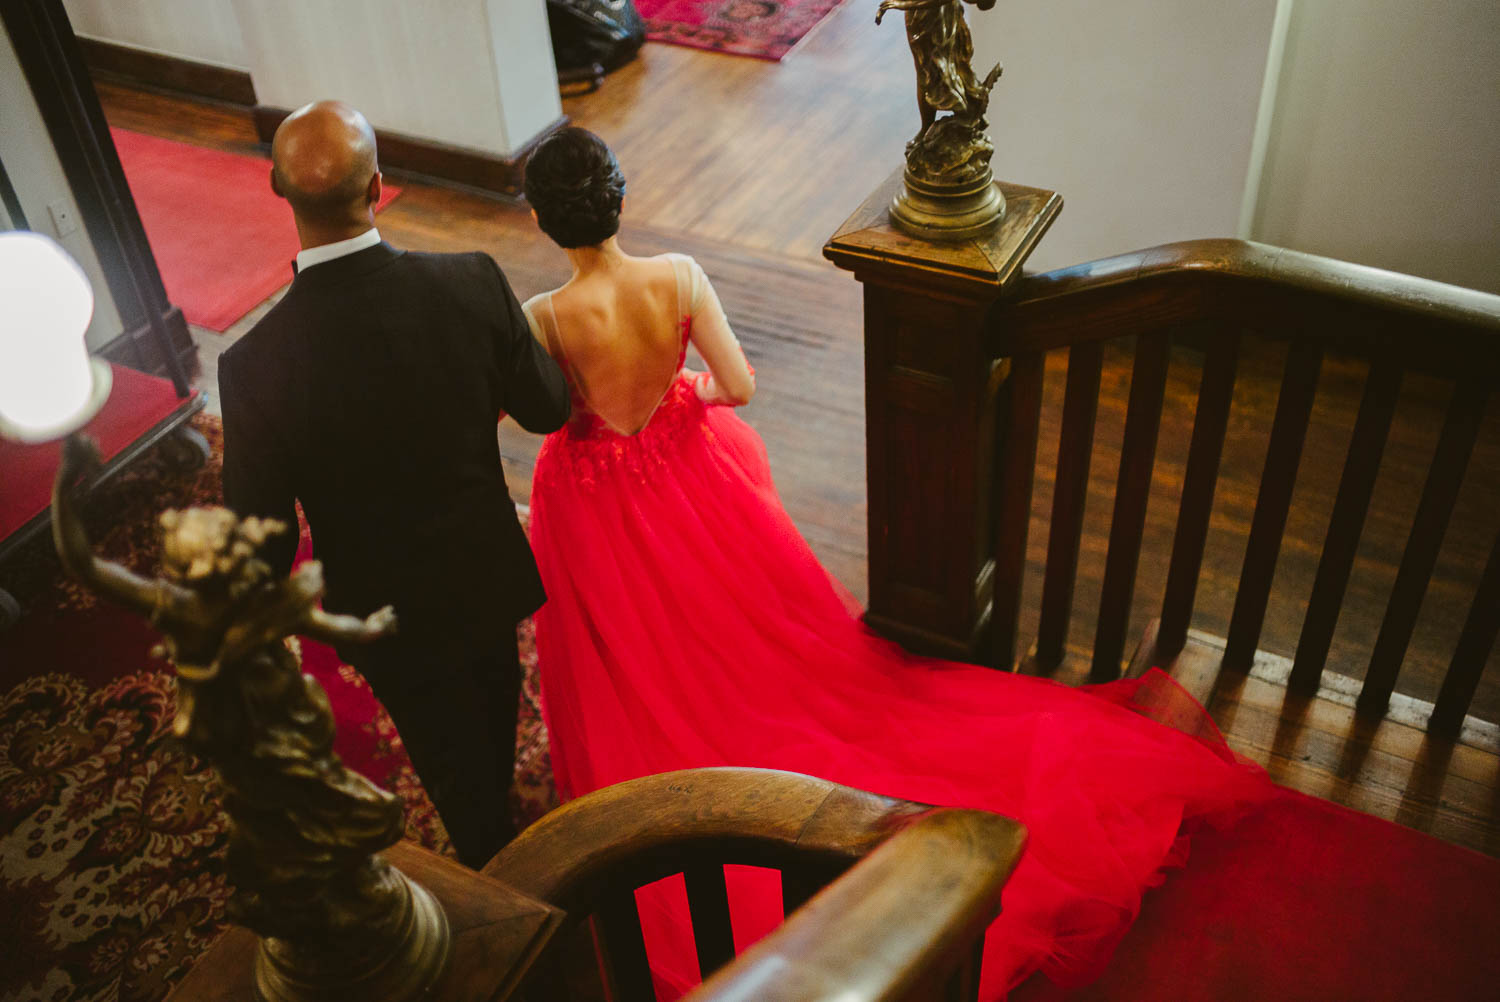 A wedded couple descend staircase at Hotel Havana -Leica photographer-Philip Thomas Photography